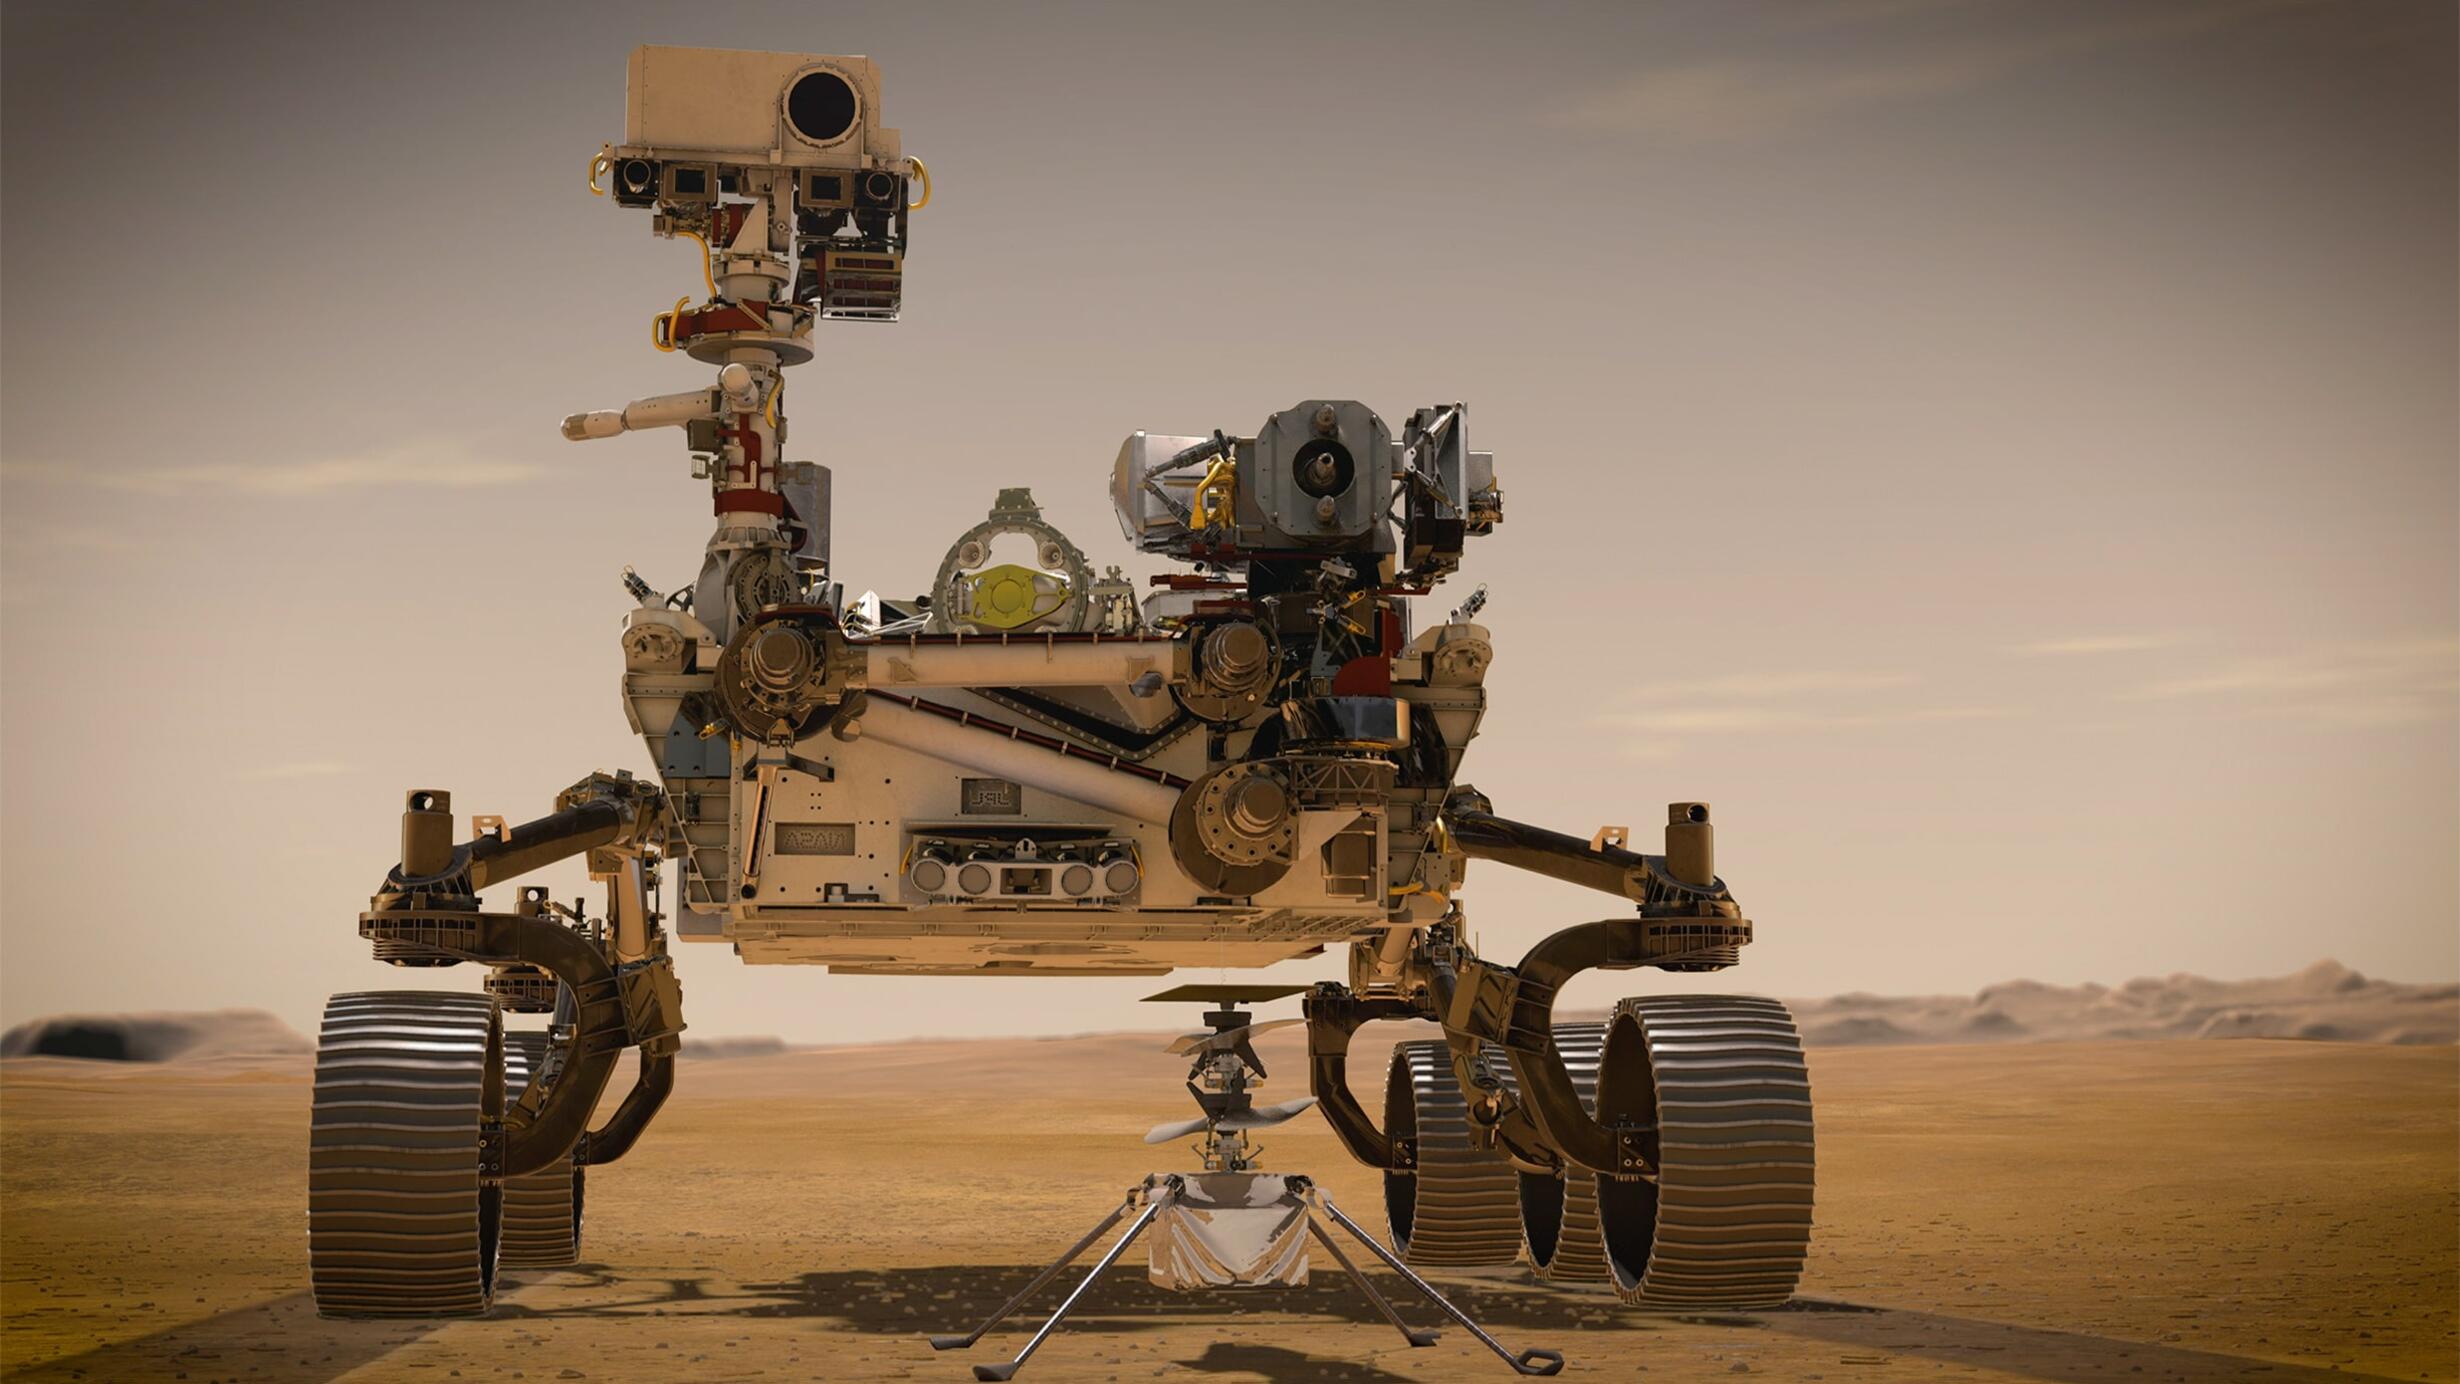 NASA's Perseverance rover on the surface of Mars. Four tires with thick treads carry cameras and other scientific equipment.